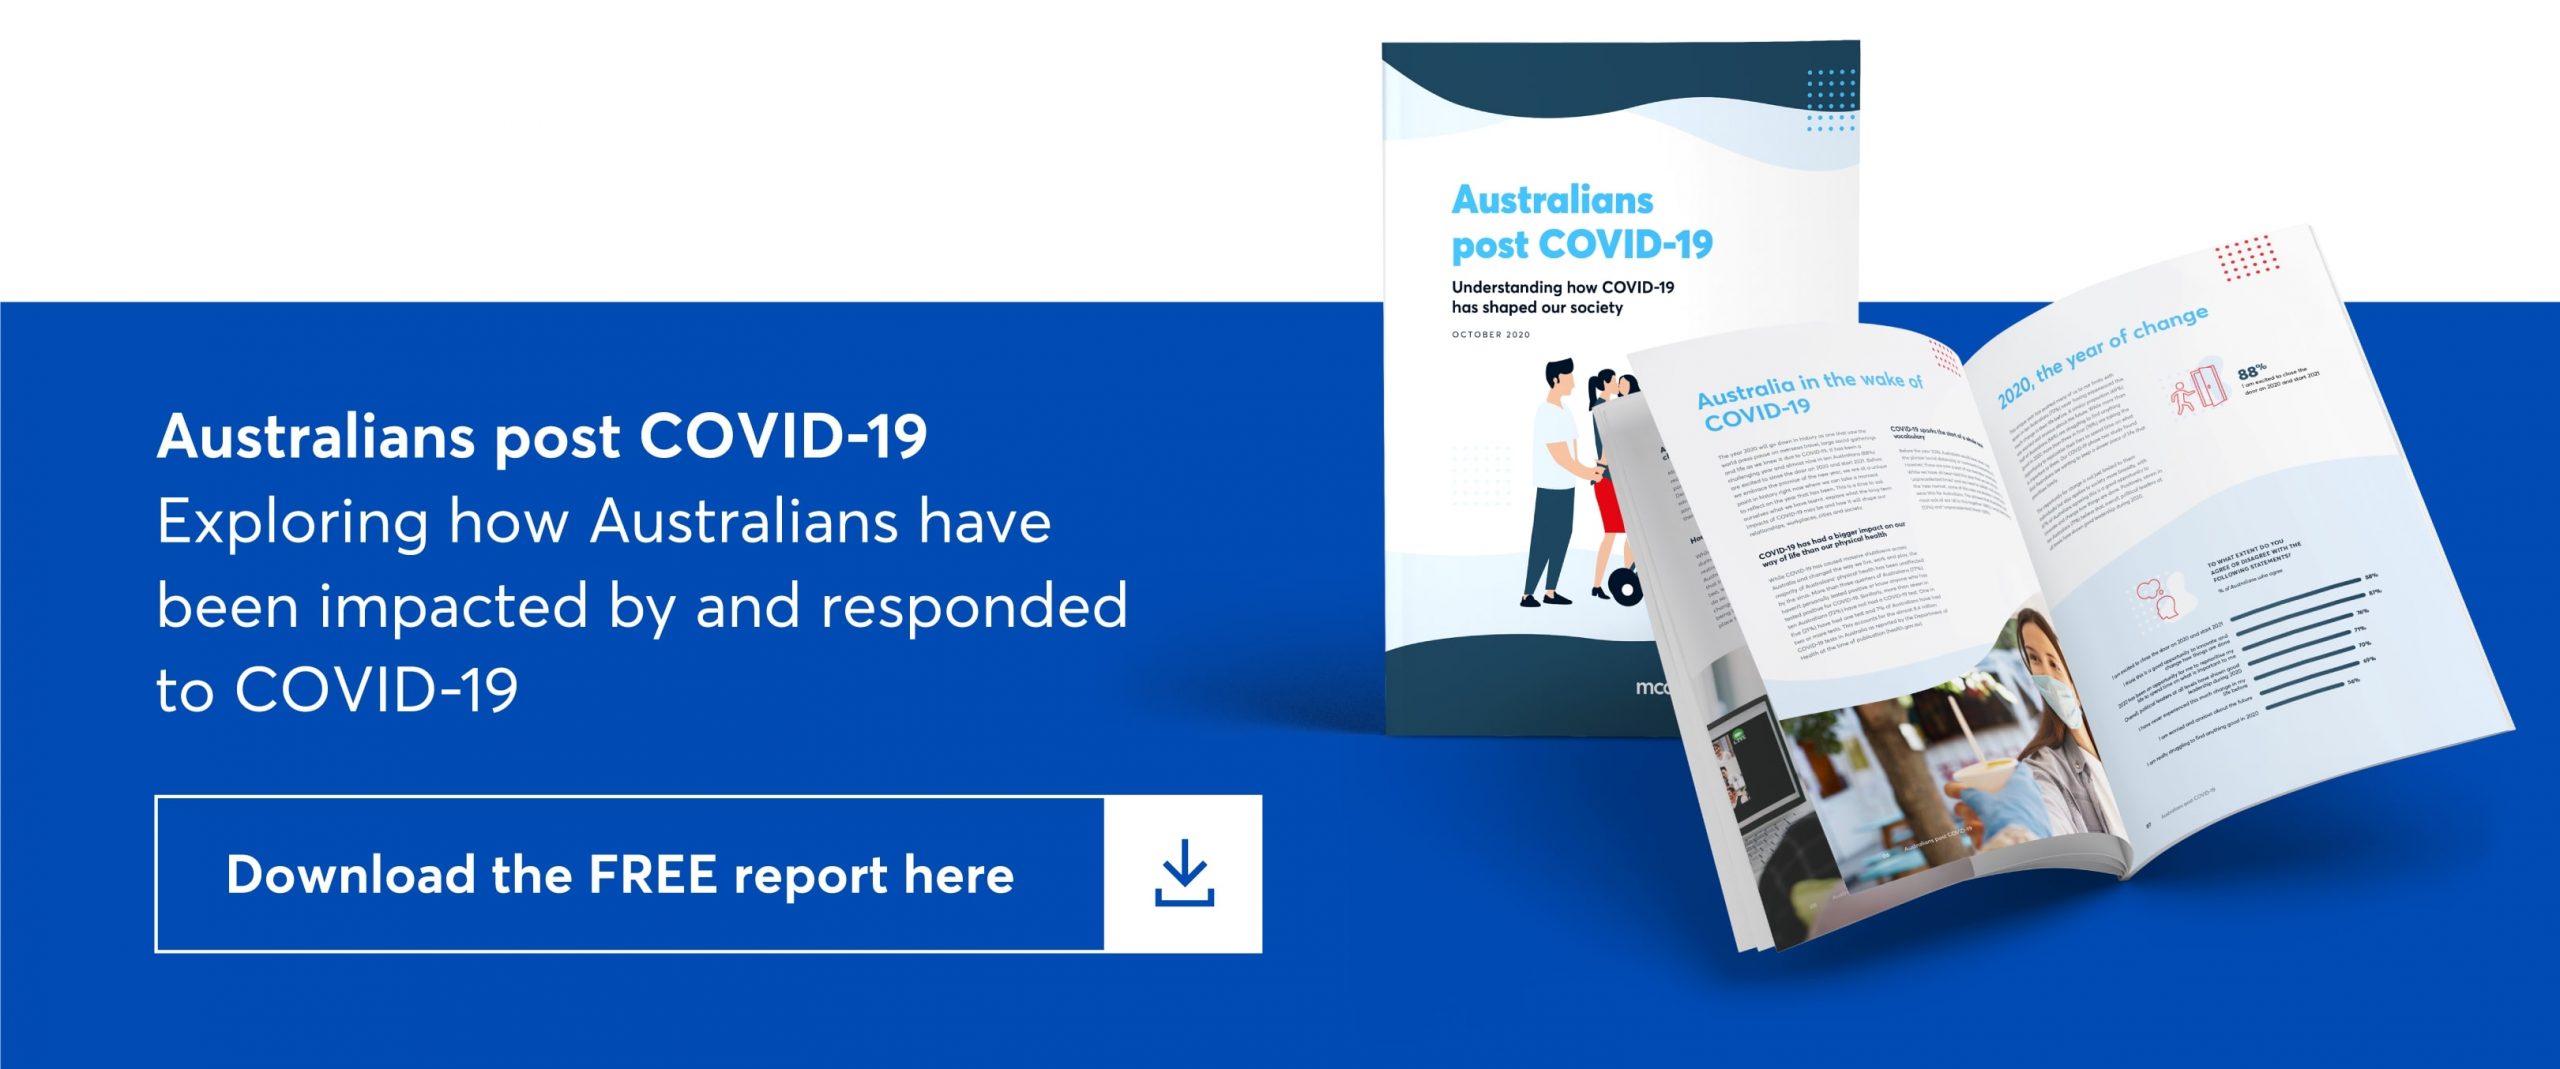 australians post covid. download the free report here